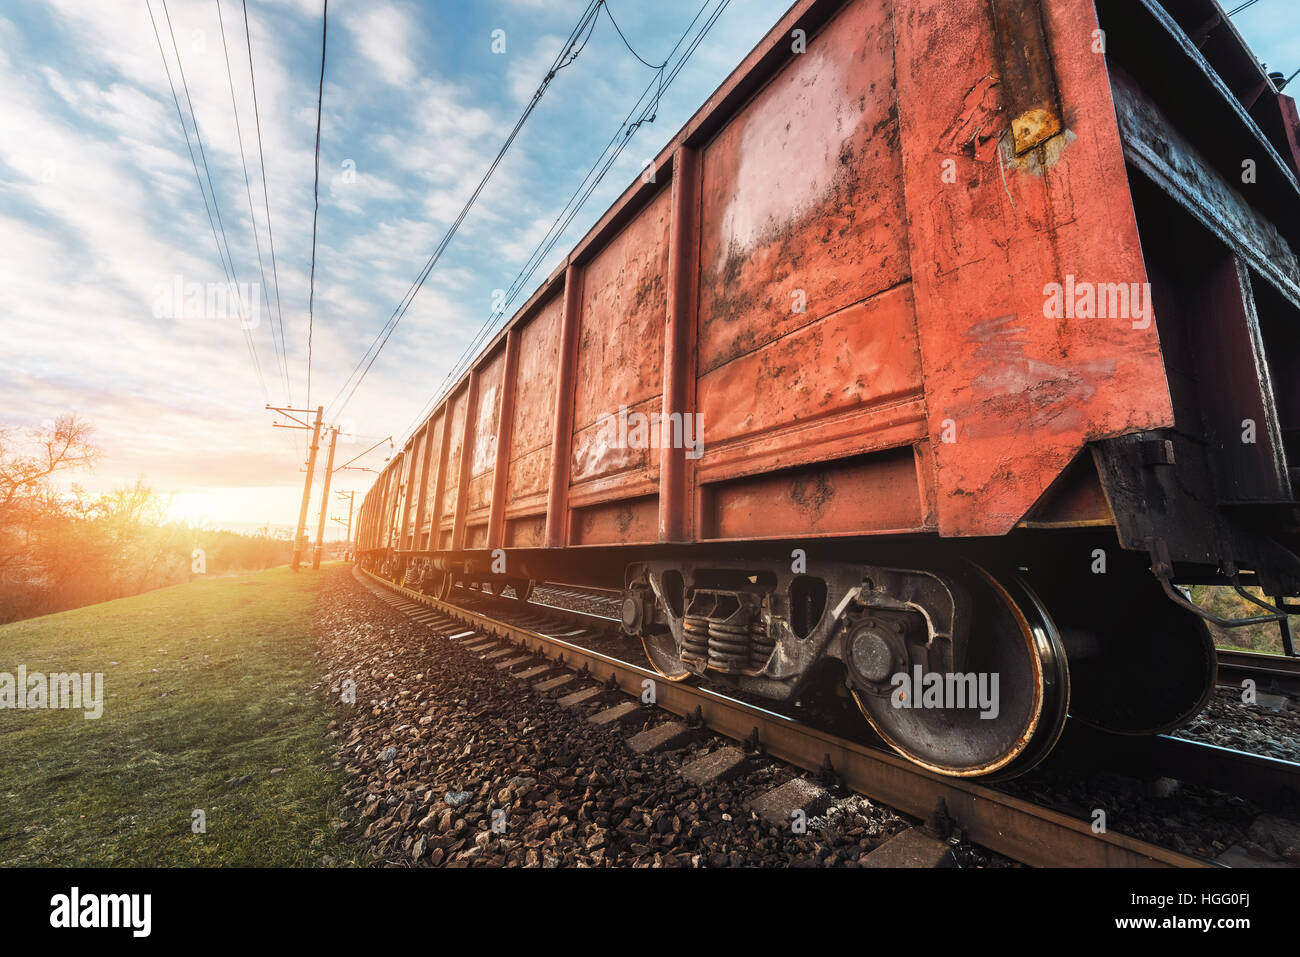 Railway station with cargo wagons and train against sunny sky in the evening. industrial landscape. Railroad with vintage toning Stock Photo